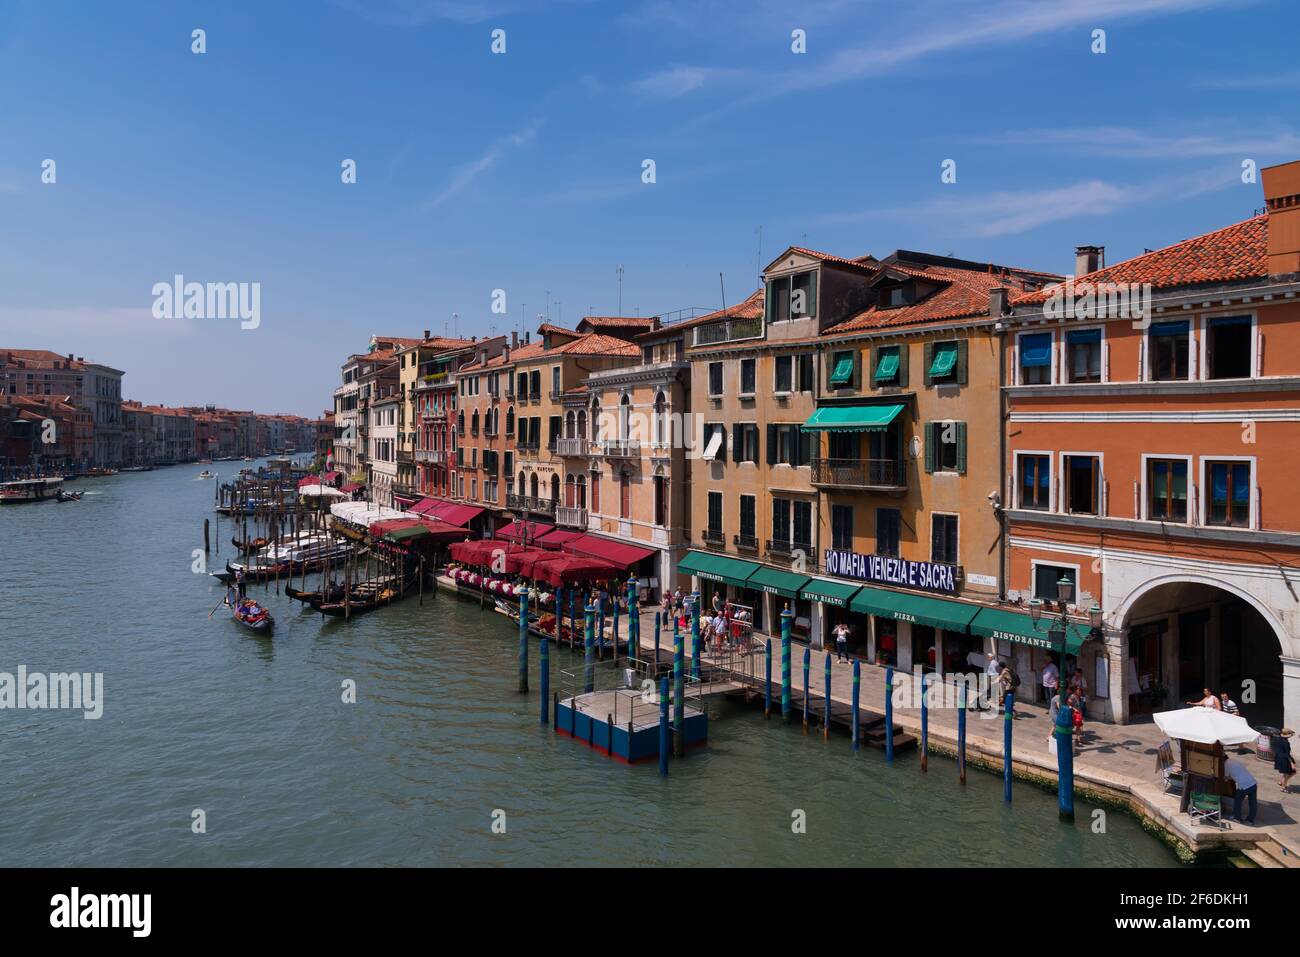 VENICE, ITALY, MAY 23, 2017: Magnificent daily view of Gondola with classical buildings along the famous Grand canal in Venice, Italy Stock Photo